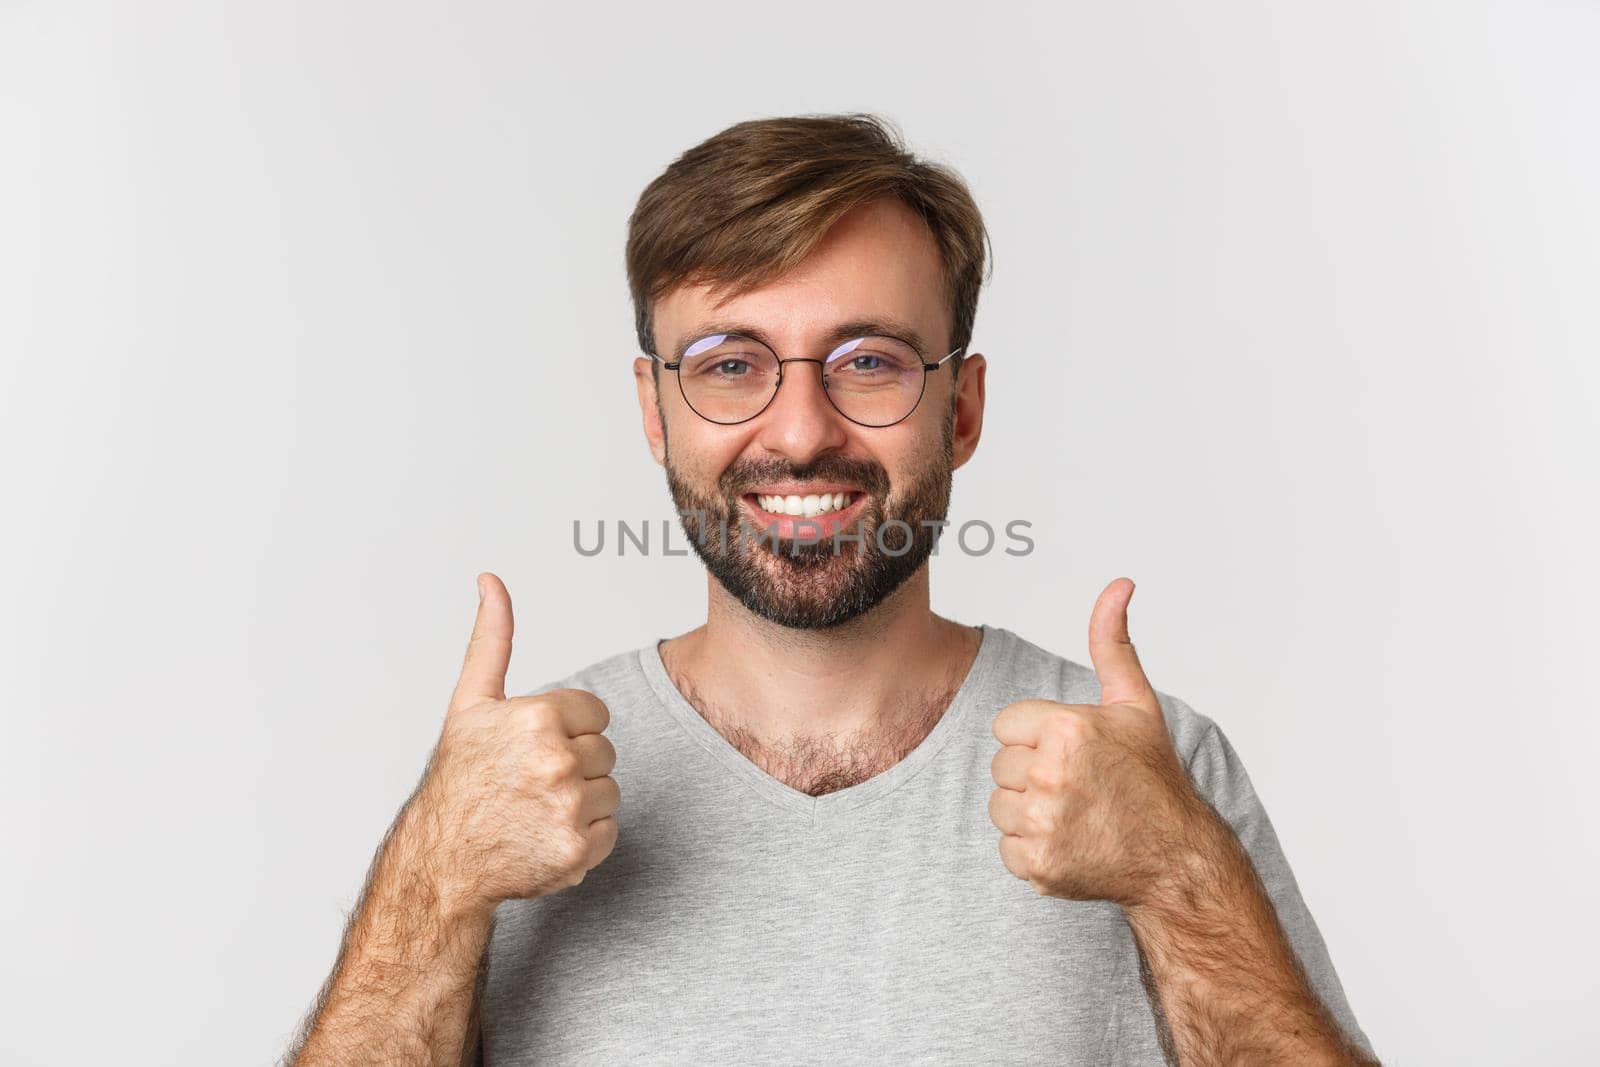 Close-up of cheerful caucasian man with beard, wearing glasses and casual t-shirt, smiling and showing thumbs-up in approval, recommend product, standing over white background.